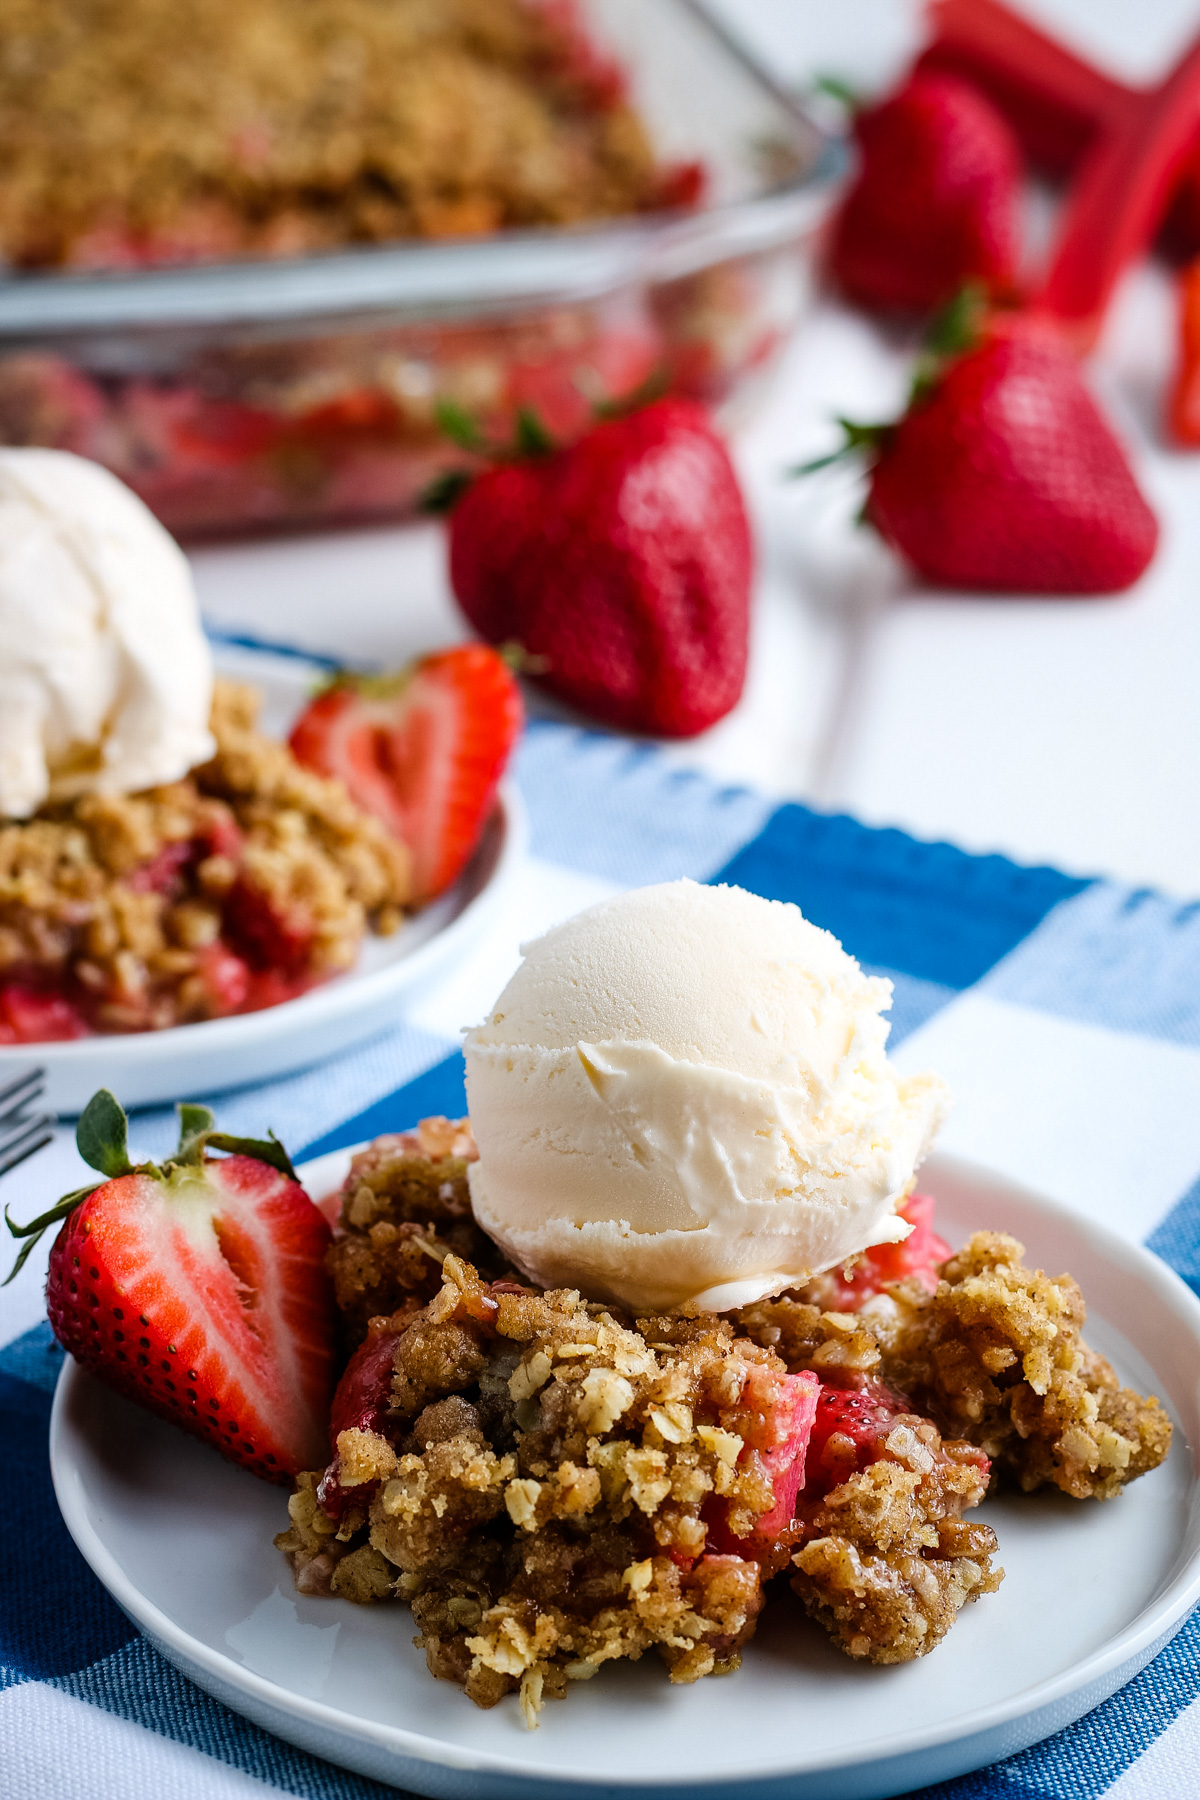 serving of gluten-free strawberry rhubarb crisp with scoop of vanilla ice cream on top, on gray plate